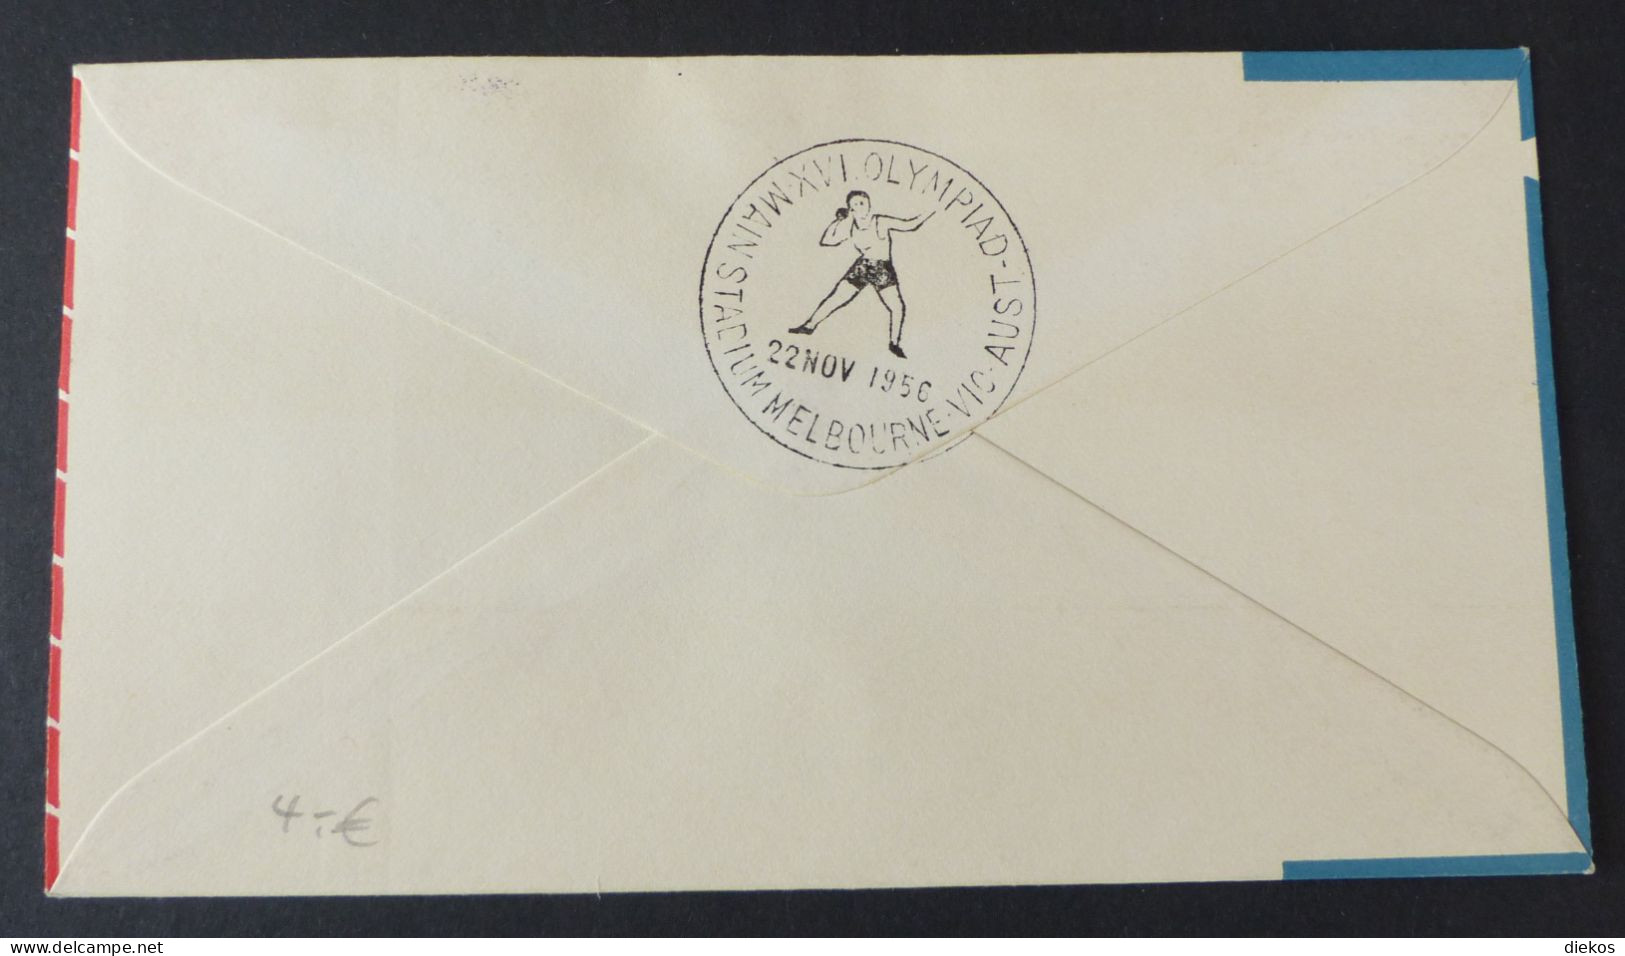 Grichenland  Air Letter 1956  Qantas Olympia Athens To Australia #cover5677 - Covers & Documents